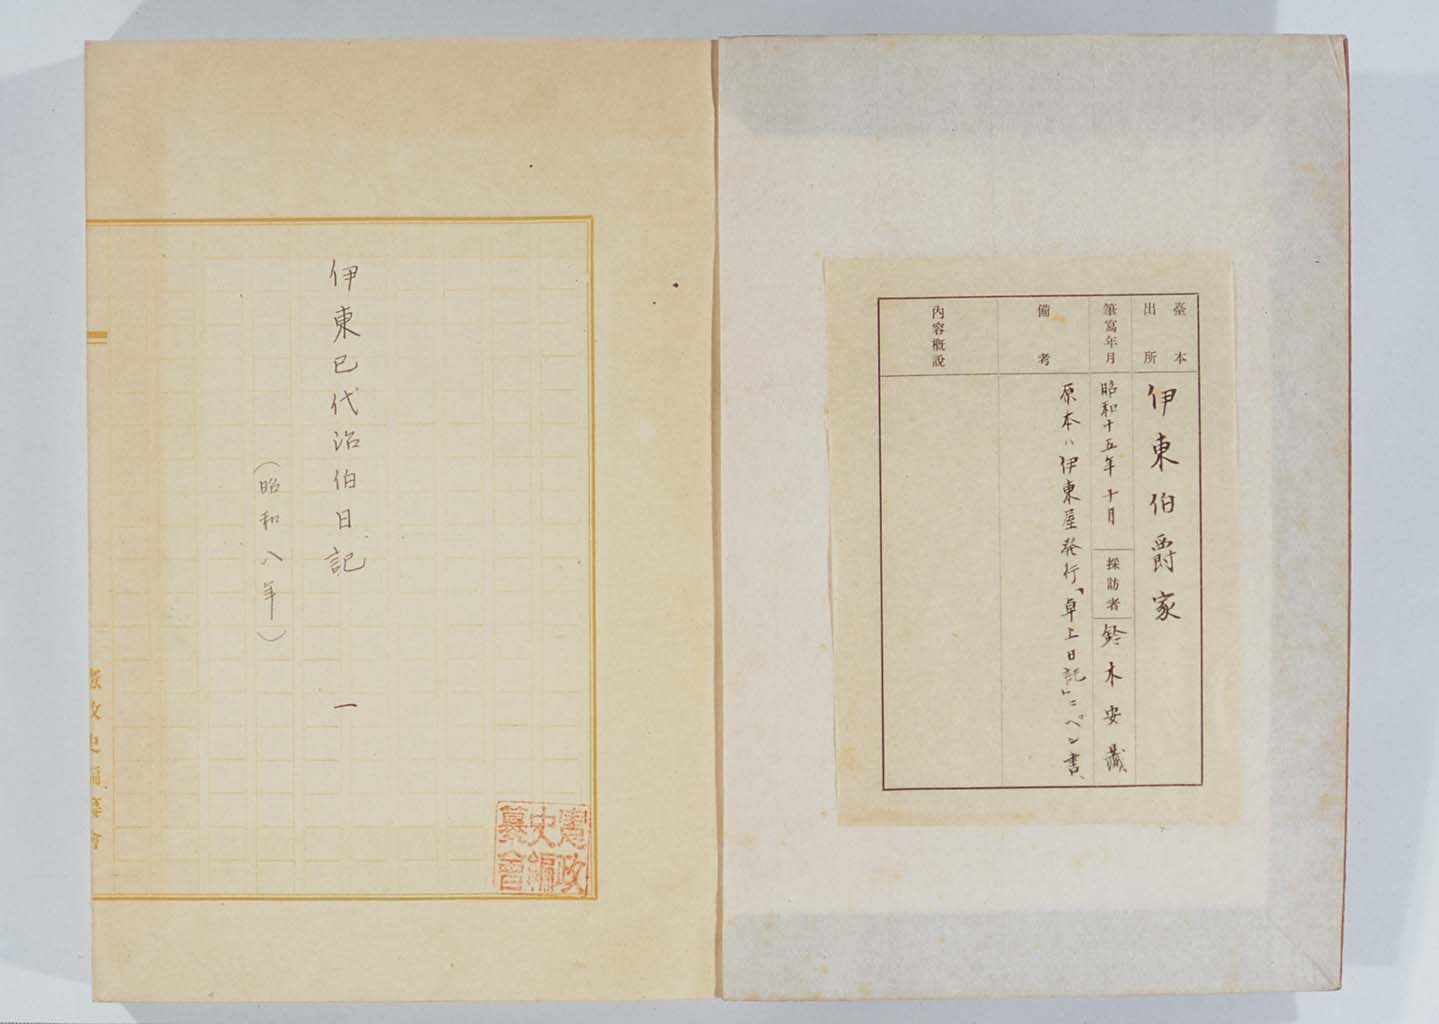 Miyoji Ito's diary ( Transcript ) February, 1933 (Showa 8) Constitutional Government Documents Collection, #632-1 ( Larger2-4 )